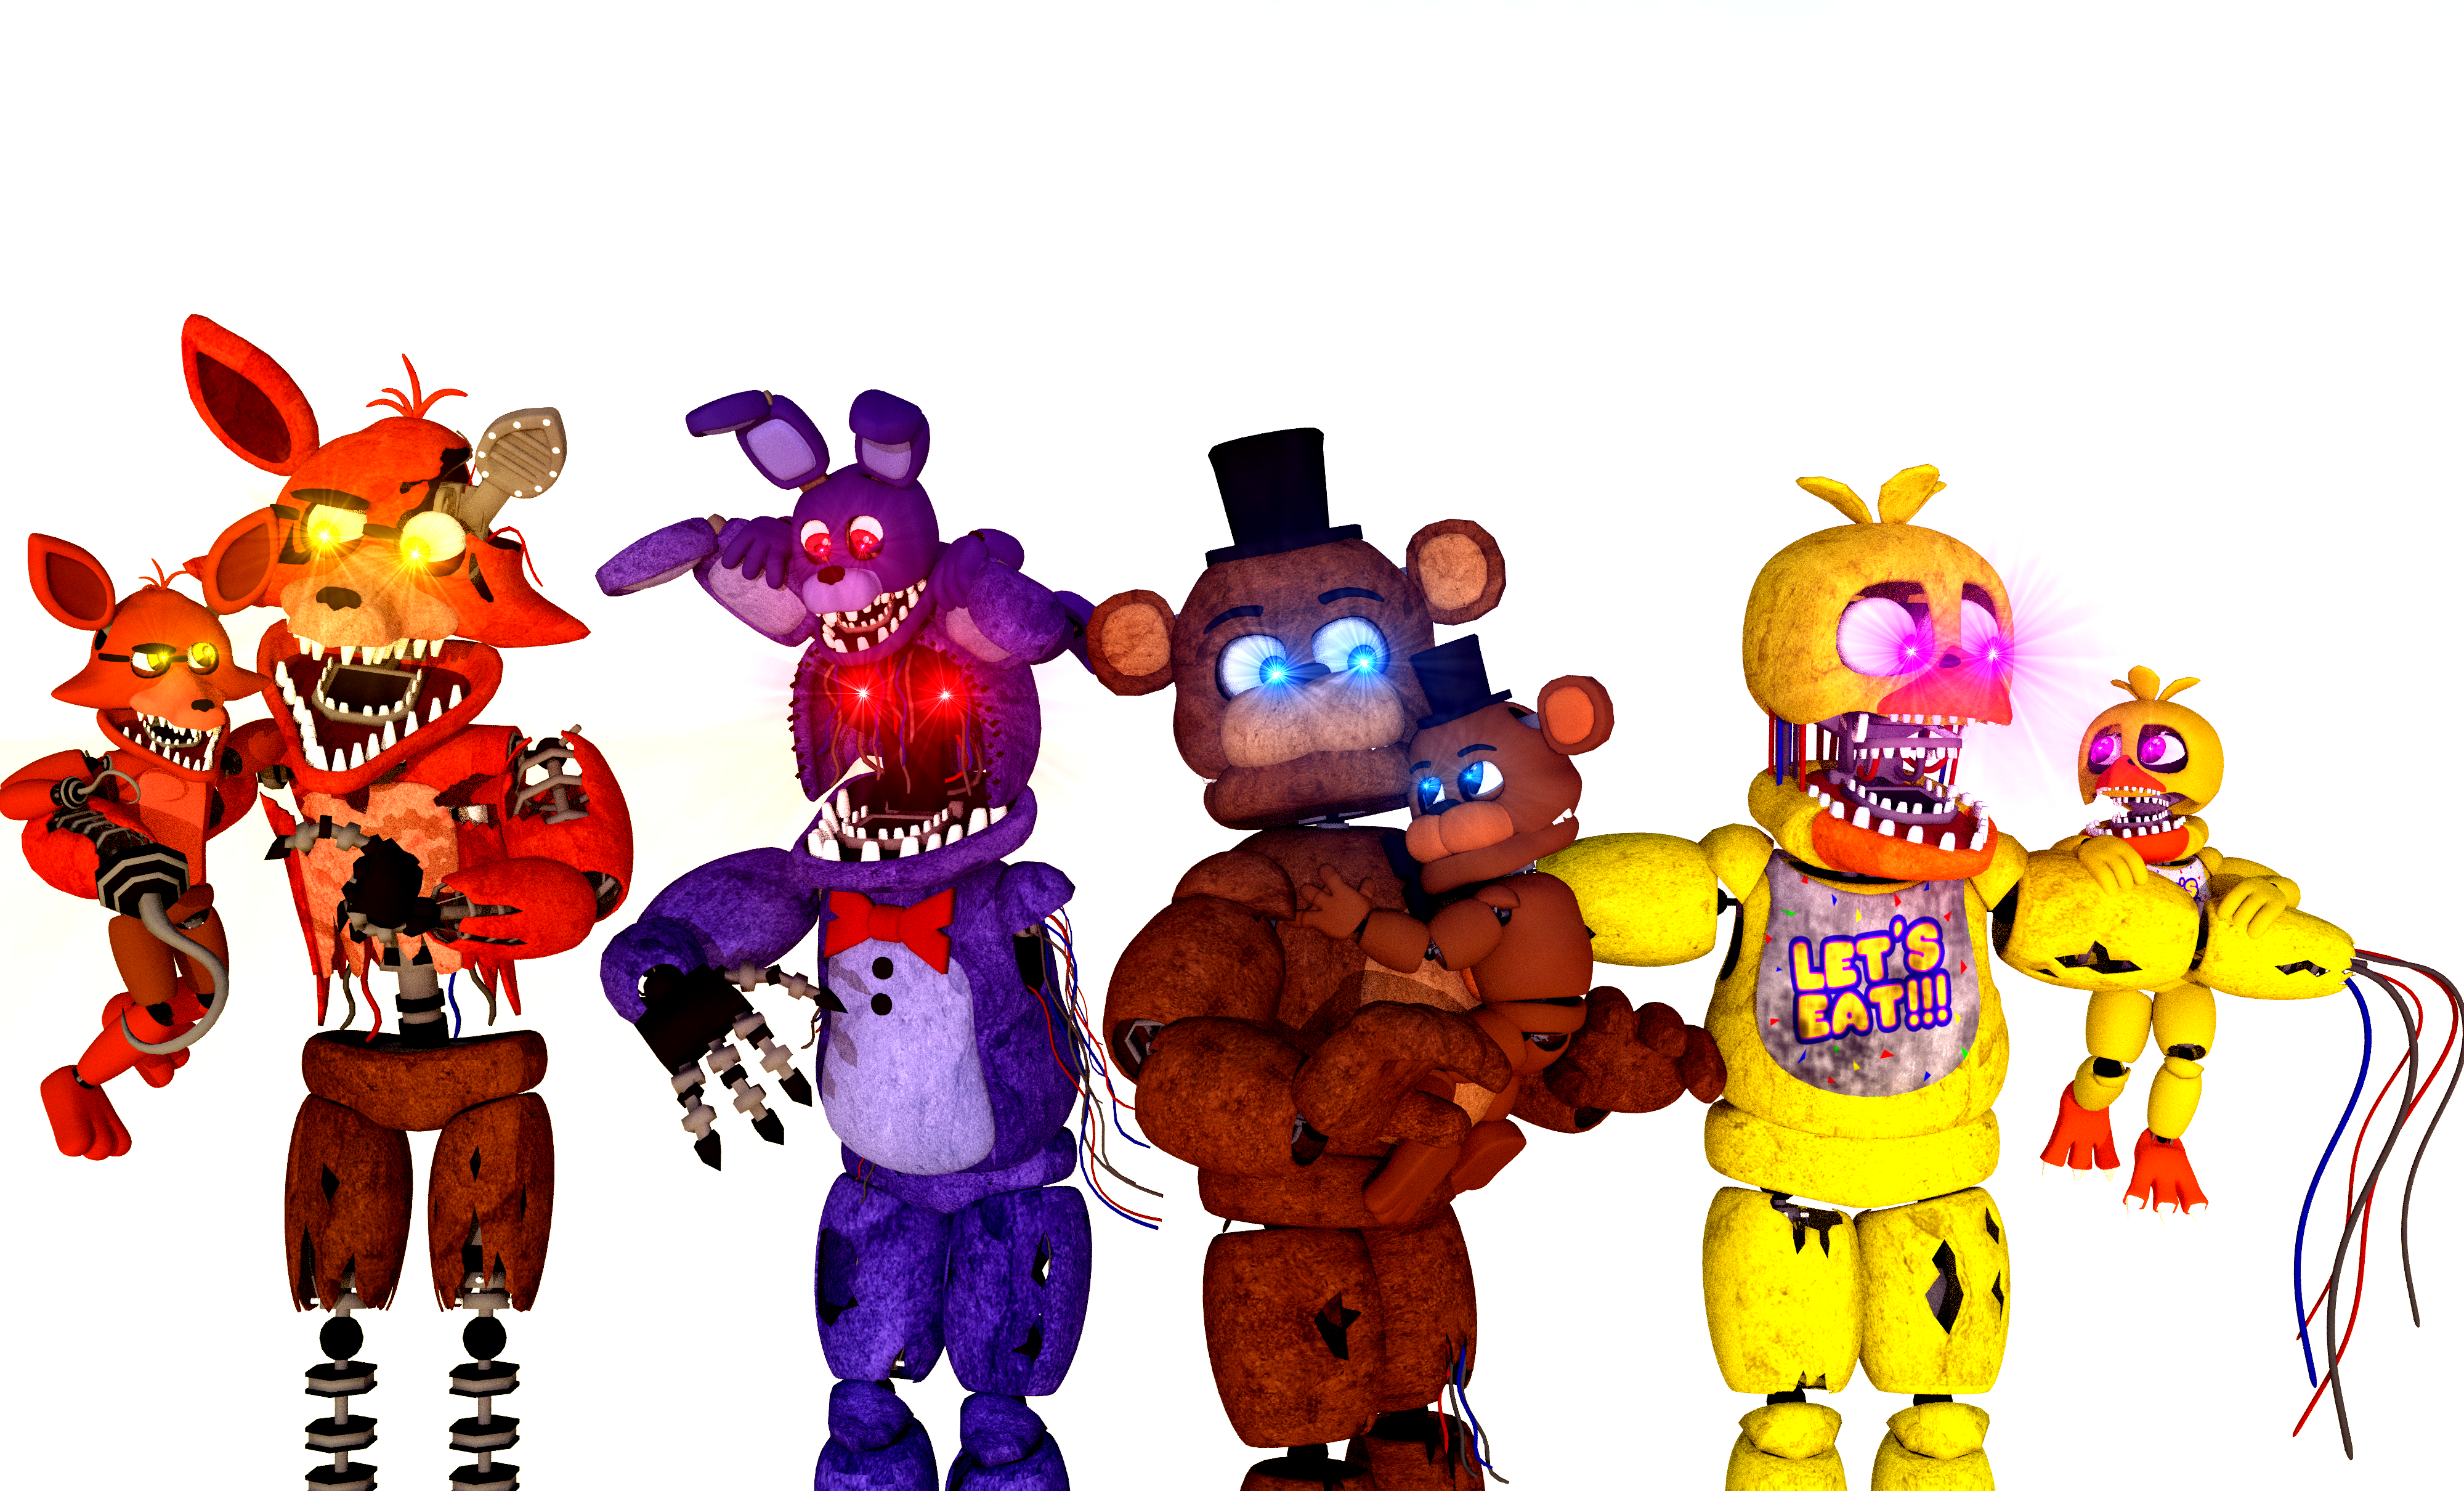 Withered FNAF АНИМАТРОНИКИ. Toy АНИМАТРОНИКИ. Маленькие АНИМАТРОНИКИ игрушки. Добрые игрушки АНИМАТРОНИКОВ. Детский аниматроники